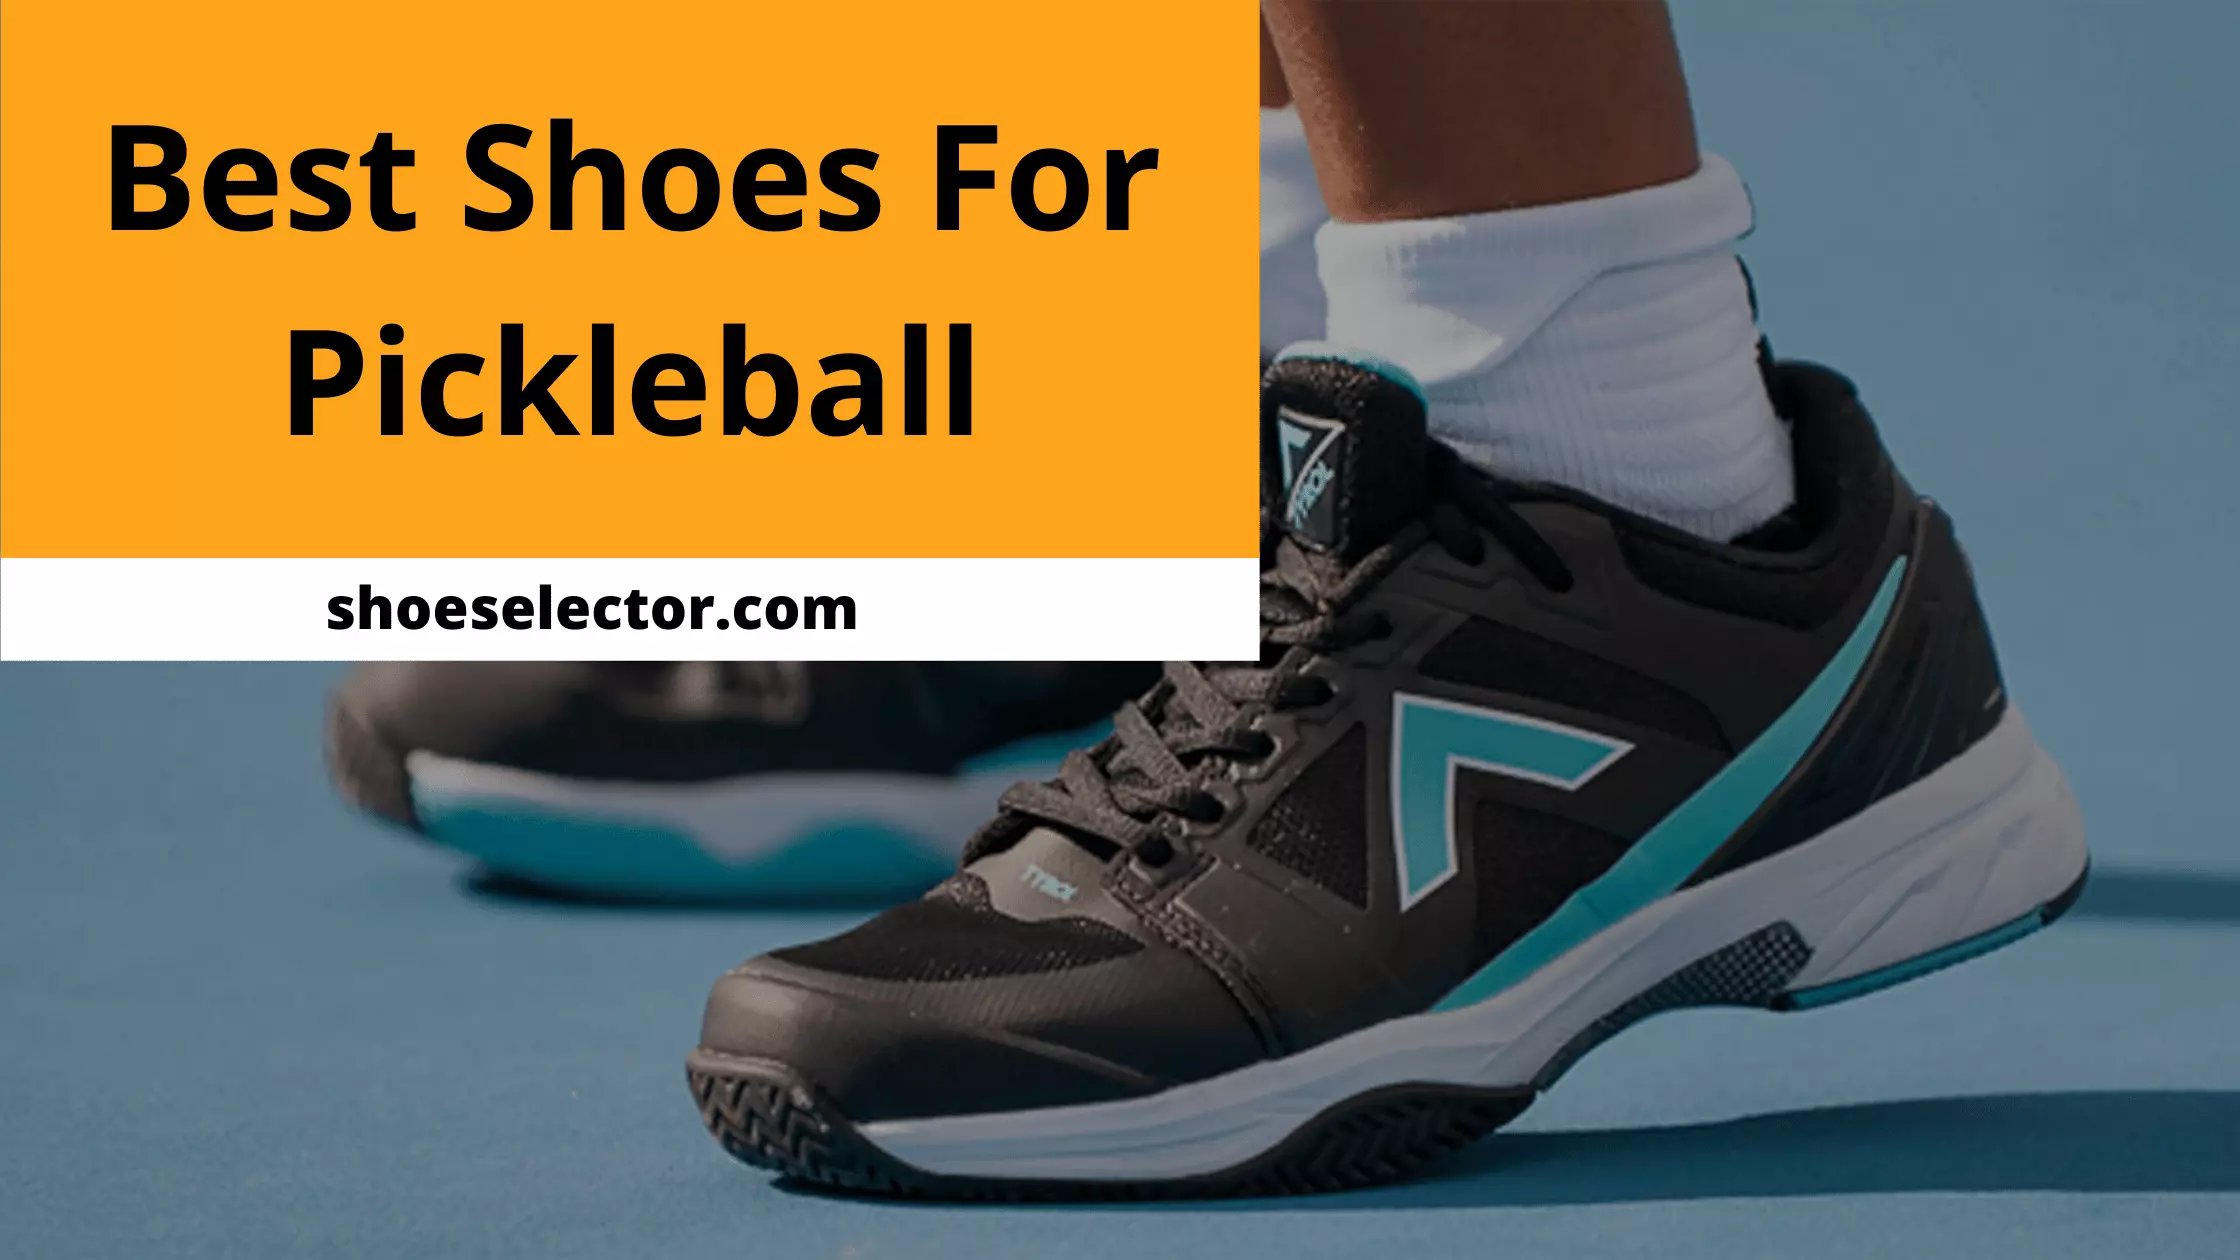 Best Shoes For Pickleball | Supportive And Stylish